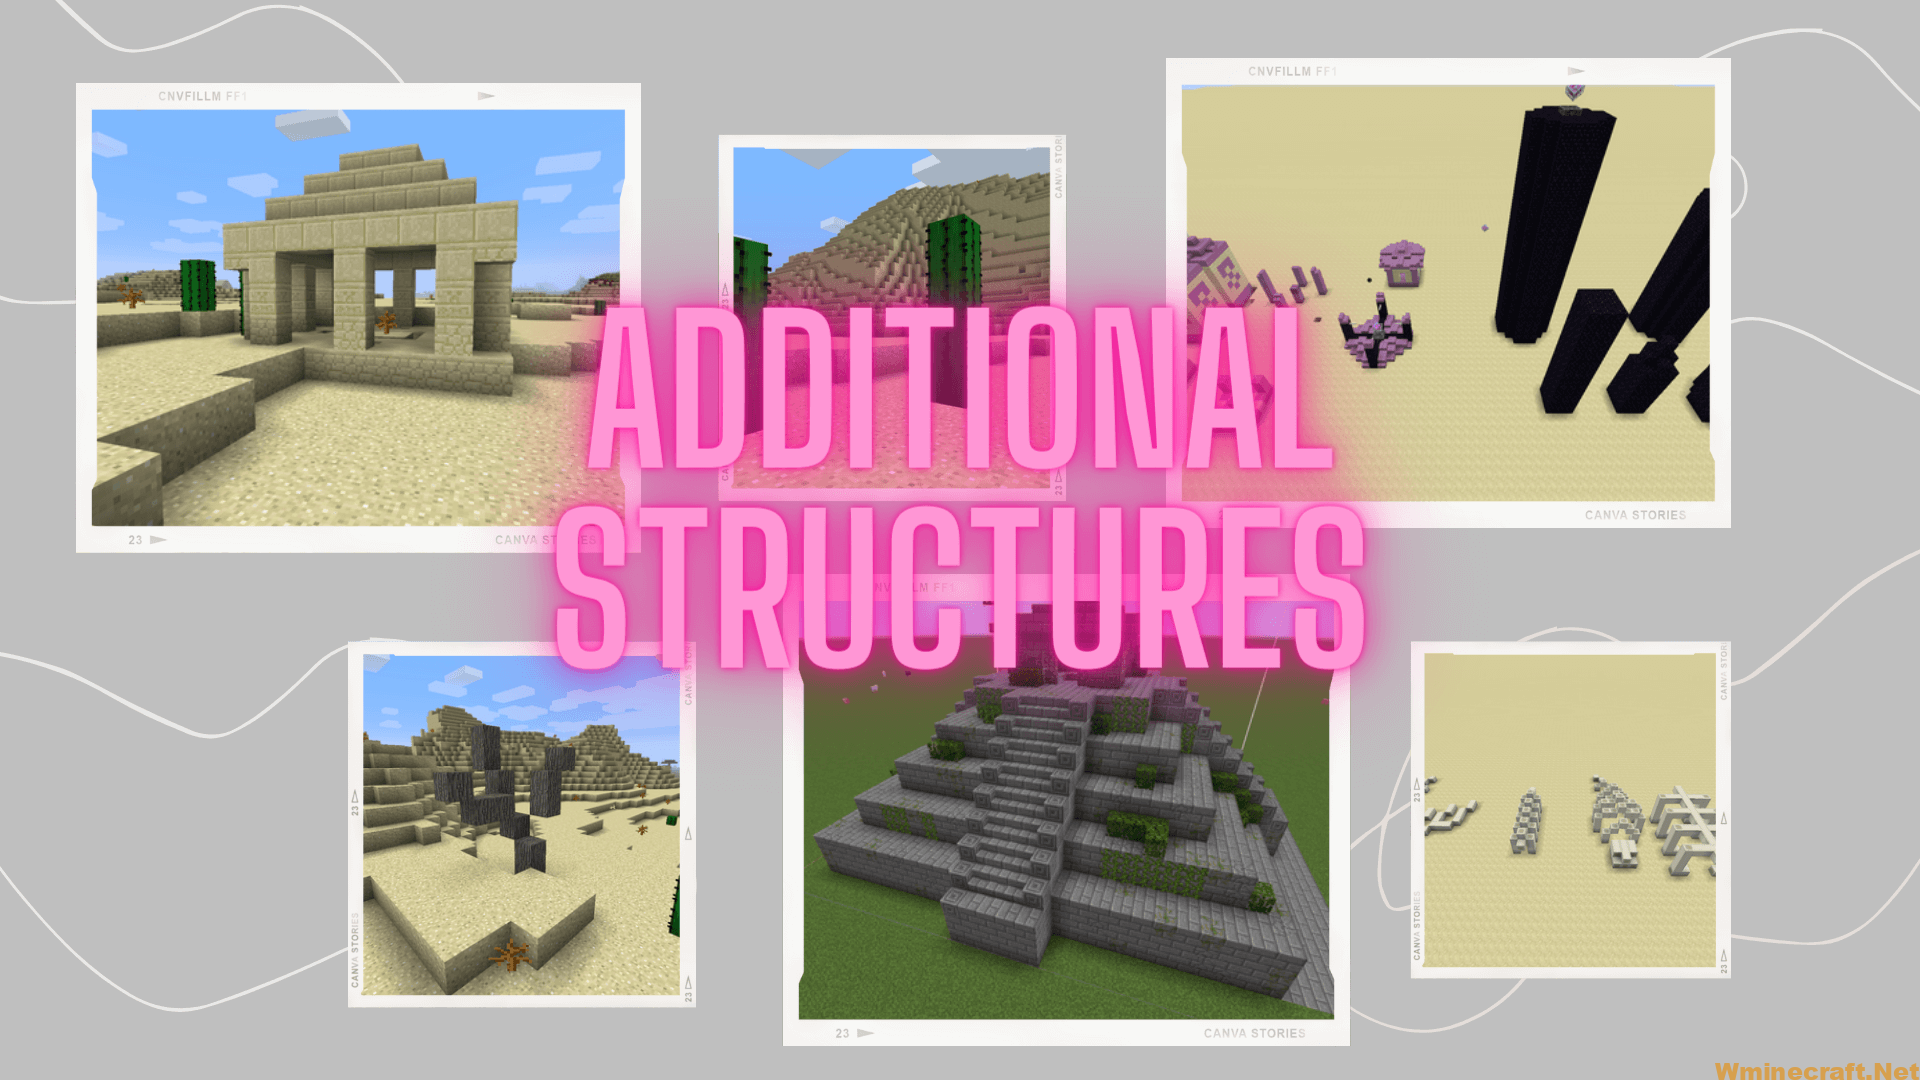 Additional Structures Mod